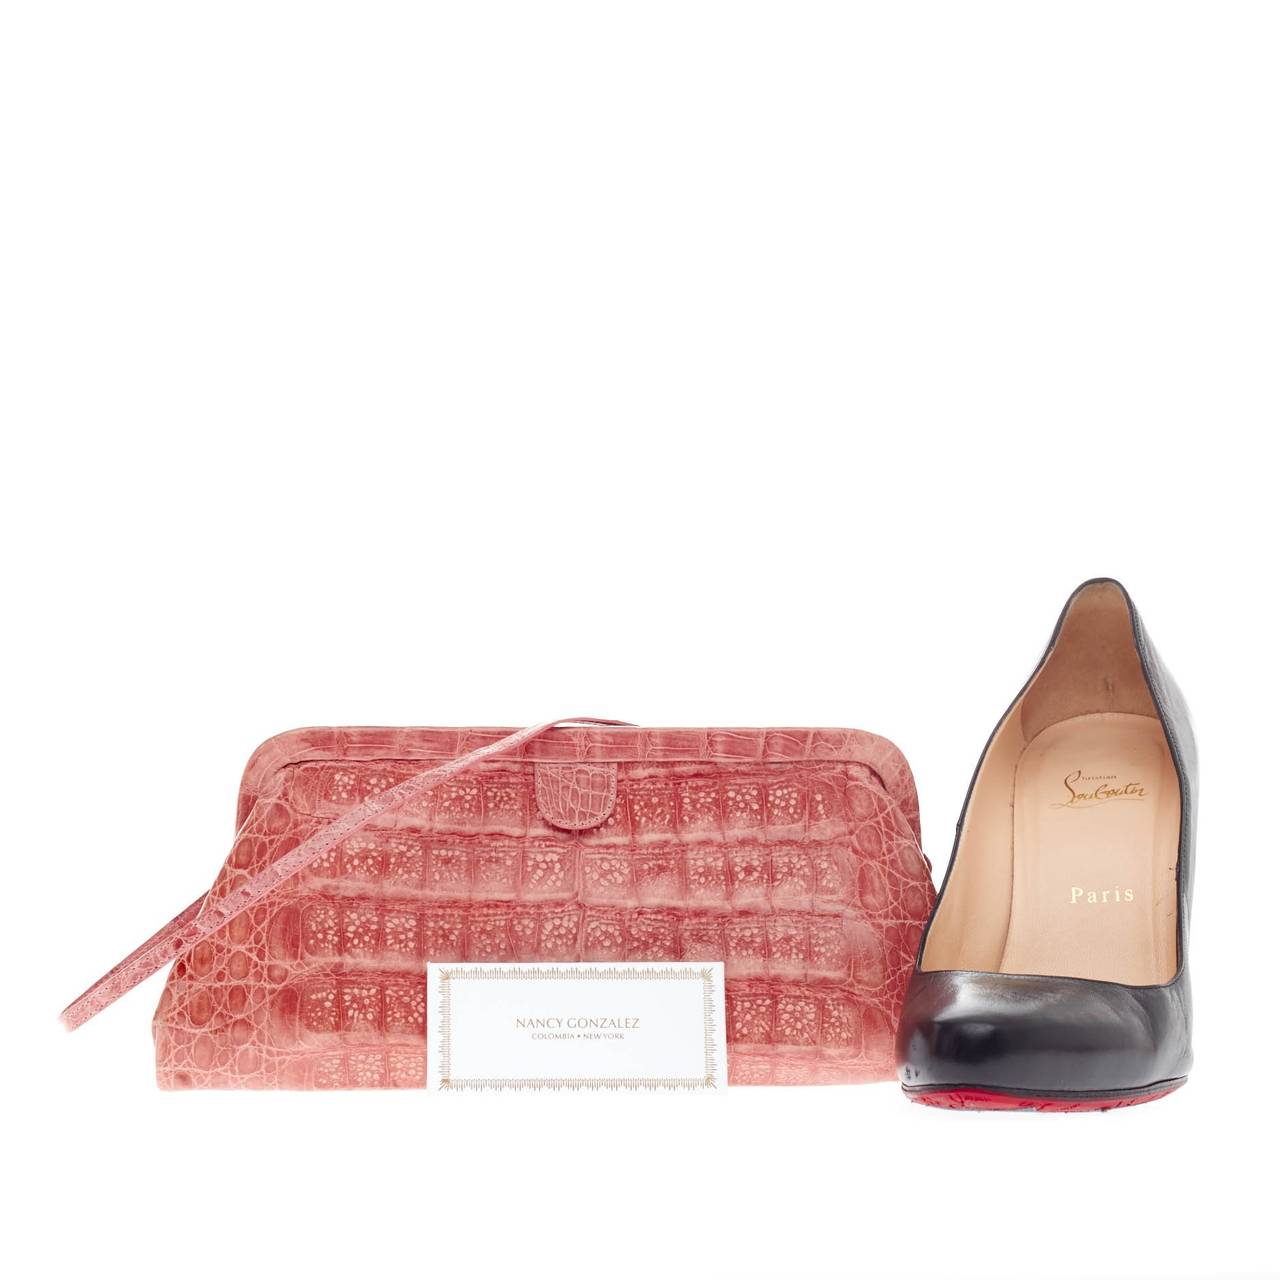 This authentic Nancy Gonzalez Convertible Clutch Crocodile Small is luxuriously elegant and perfect for a day or a night out. Highly crafted from genuine pink crocodile skin, this beautiful clutch opens to a tan suede interior showcasing zip pocket